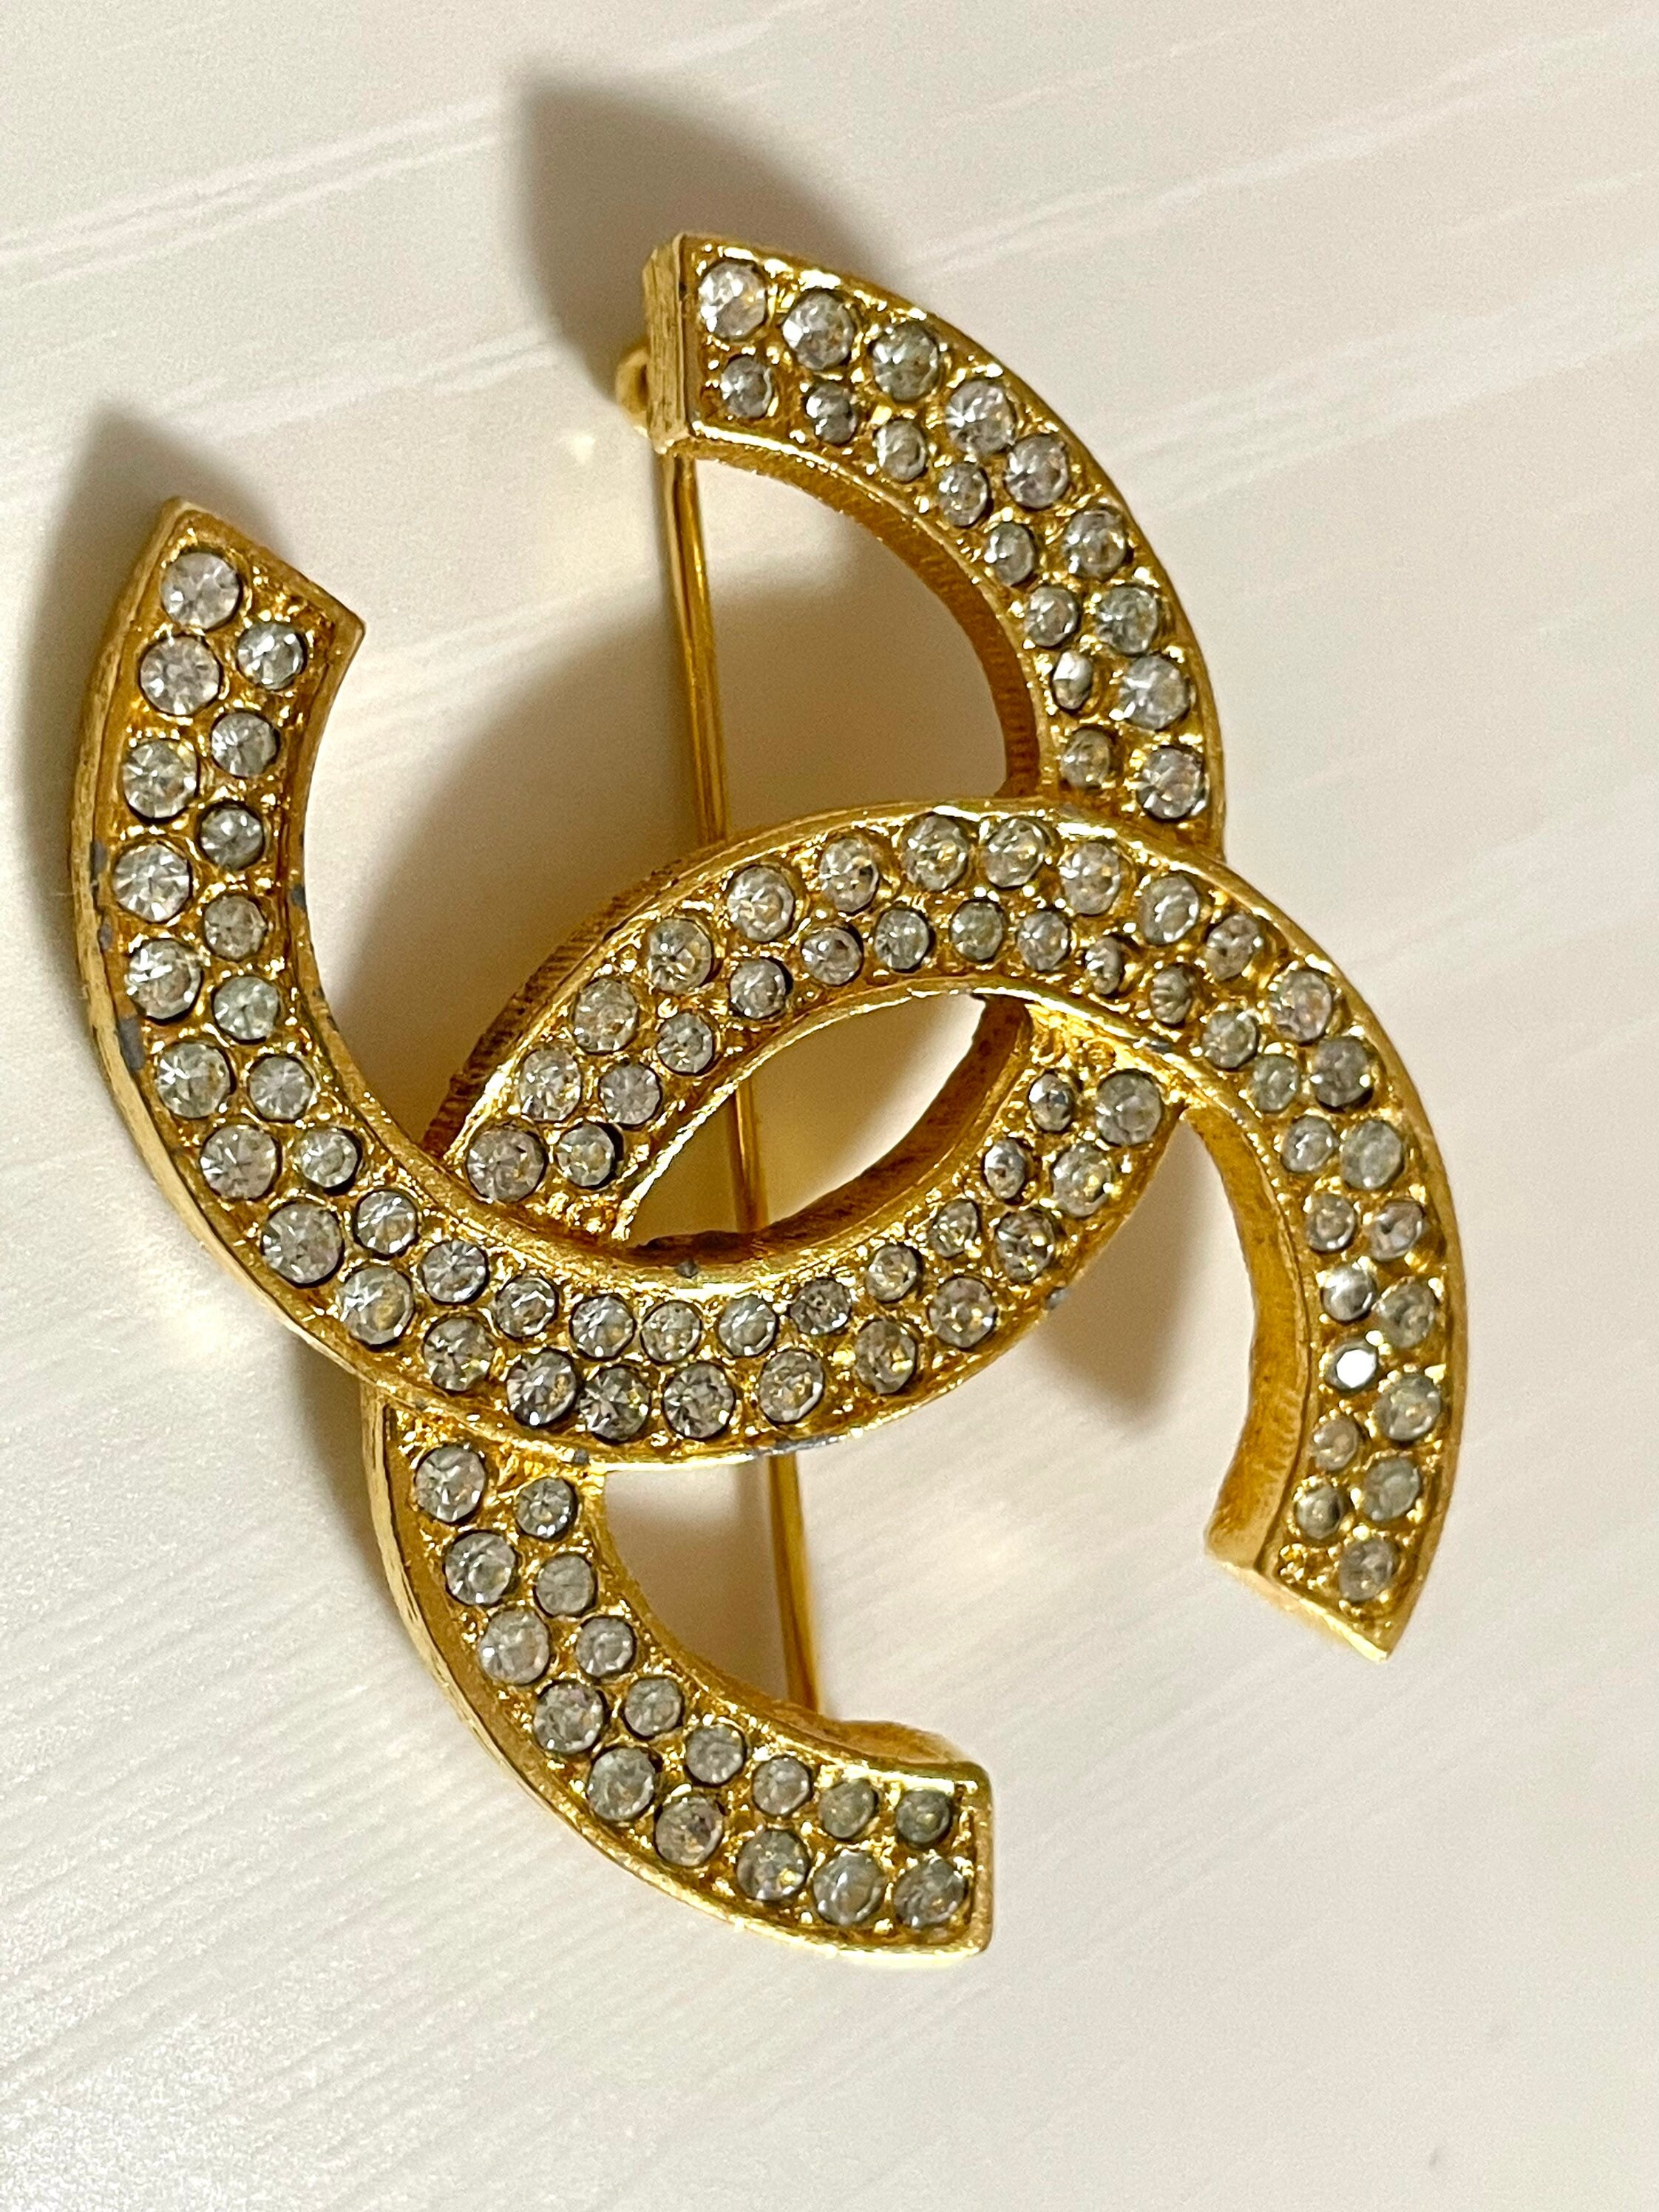 Buy W2 Vintage Chanel CC Brooch With Crystals. Must Have Classic